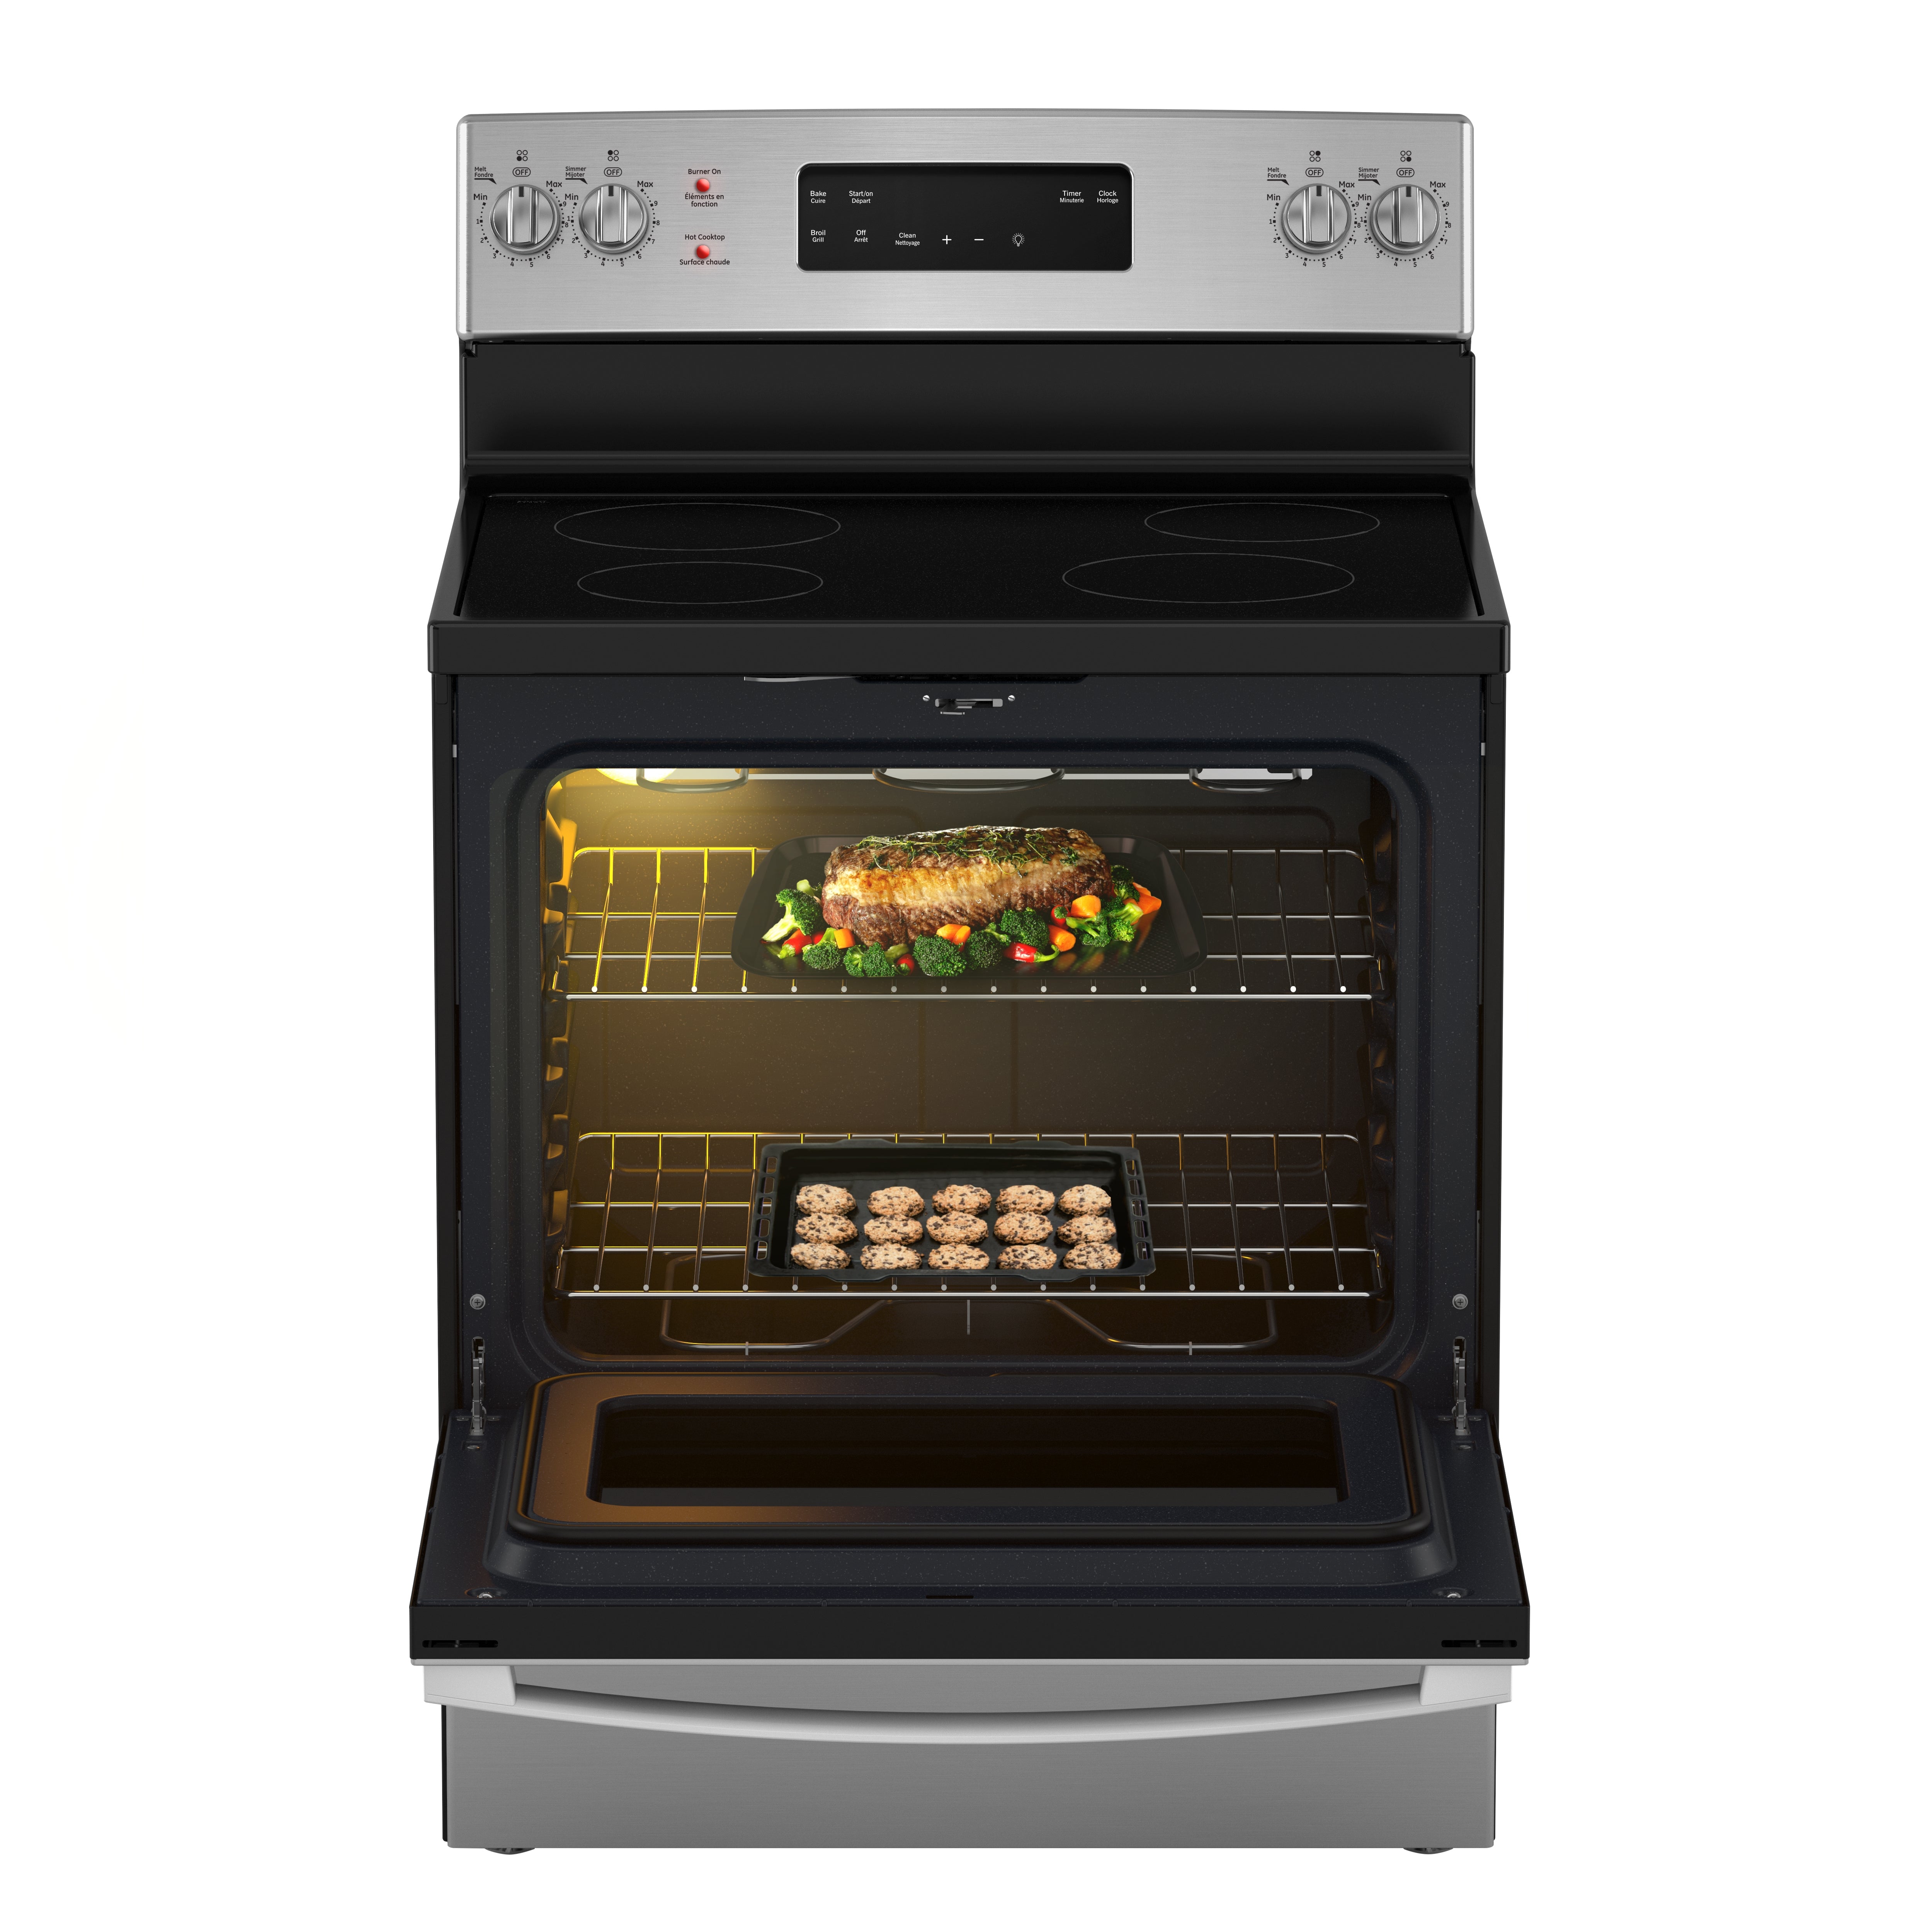 GE - 5 cu. ft  Electric Range in Stainless - JCB630SVSS